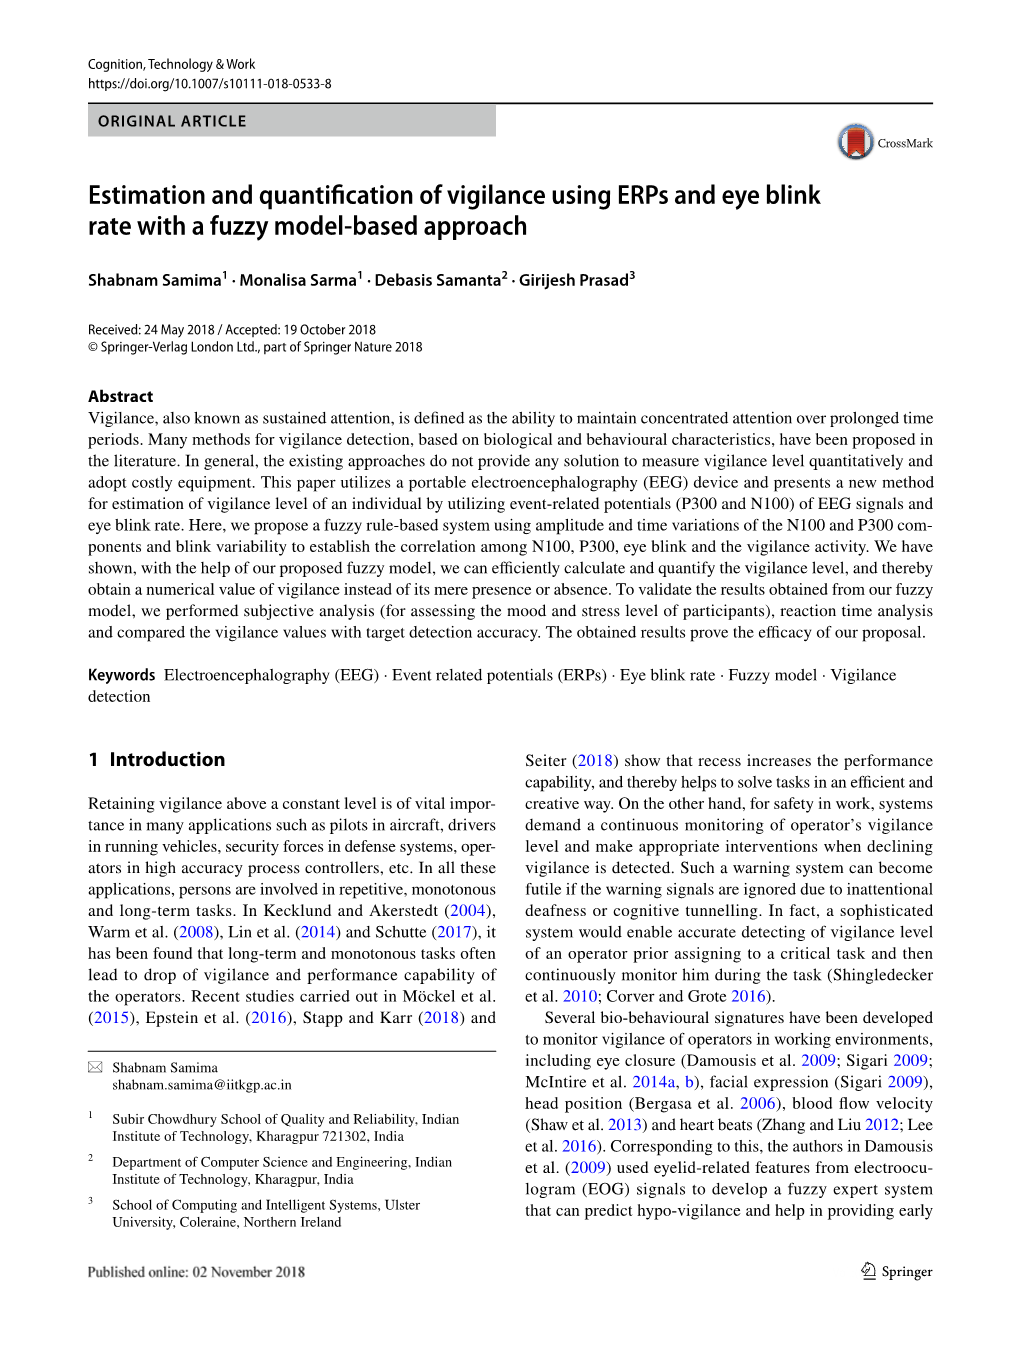 Estimation and Quantification of Vigilance Using Erps and Eye Blink Rate with a Fuzzy Model‑Based Approach